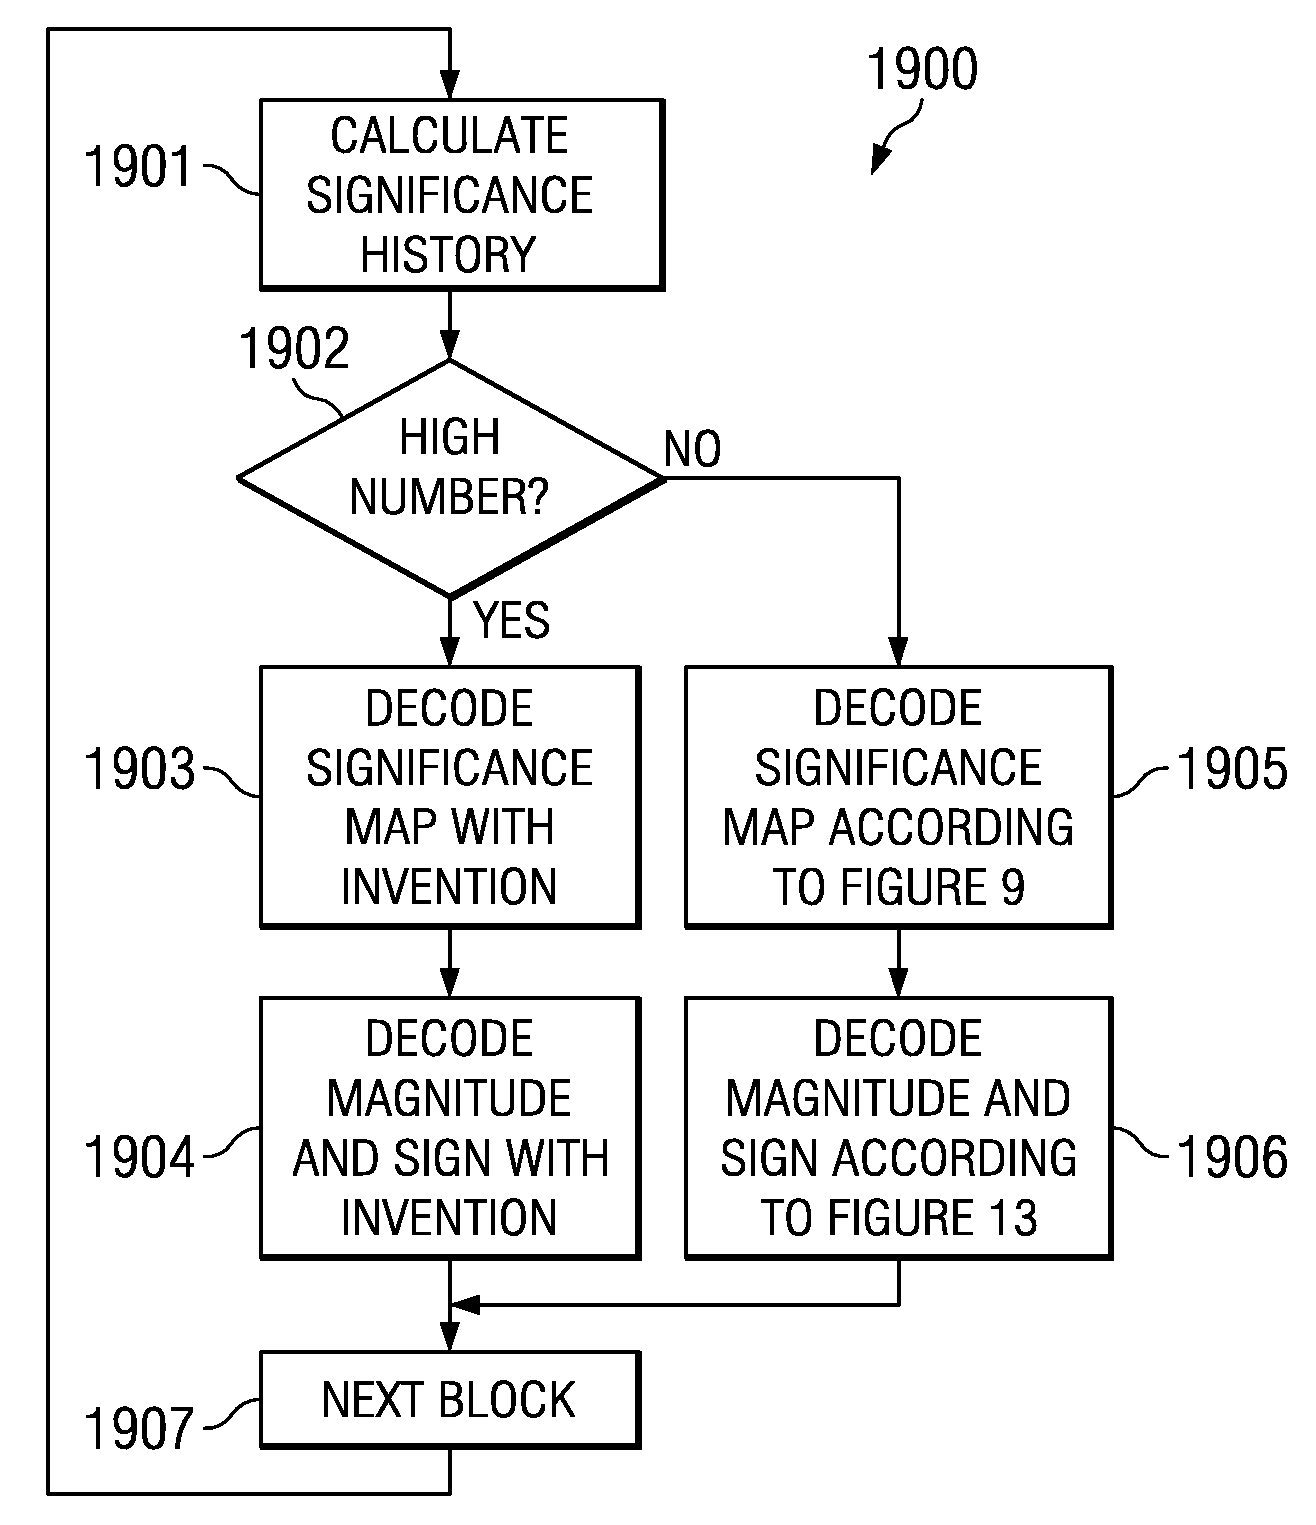 Method of CABAC Significance MAP Decoding Suitable for Use on VLIW Data Processors